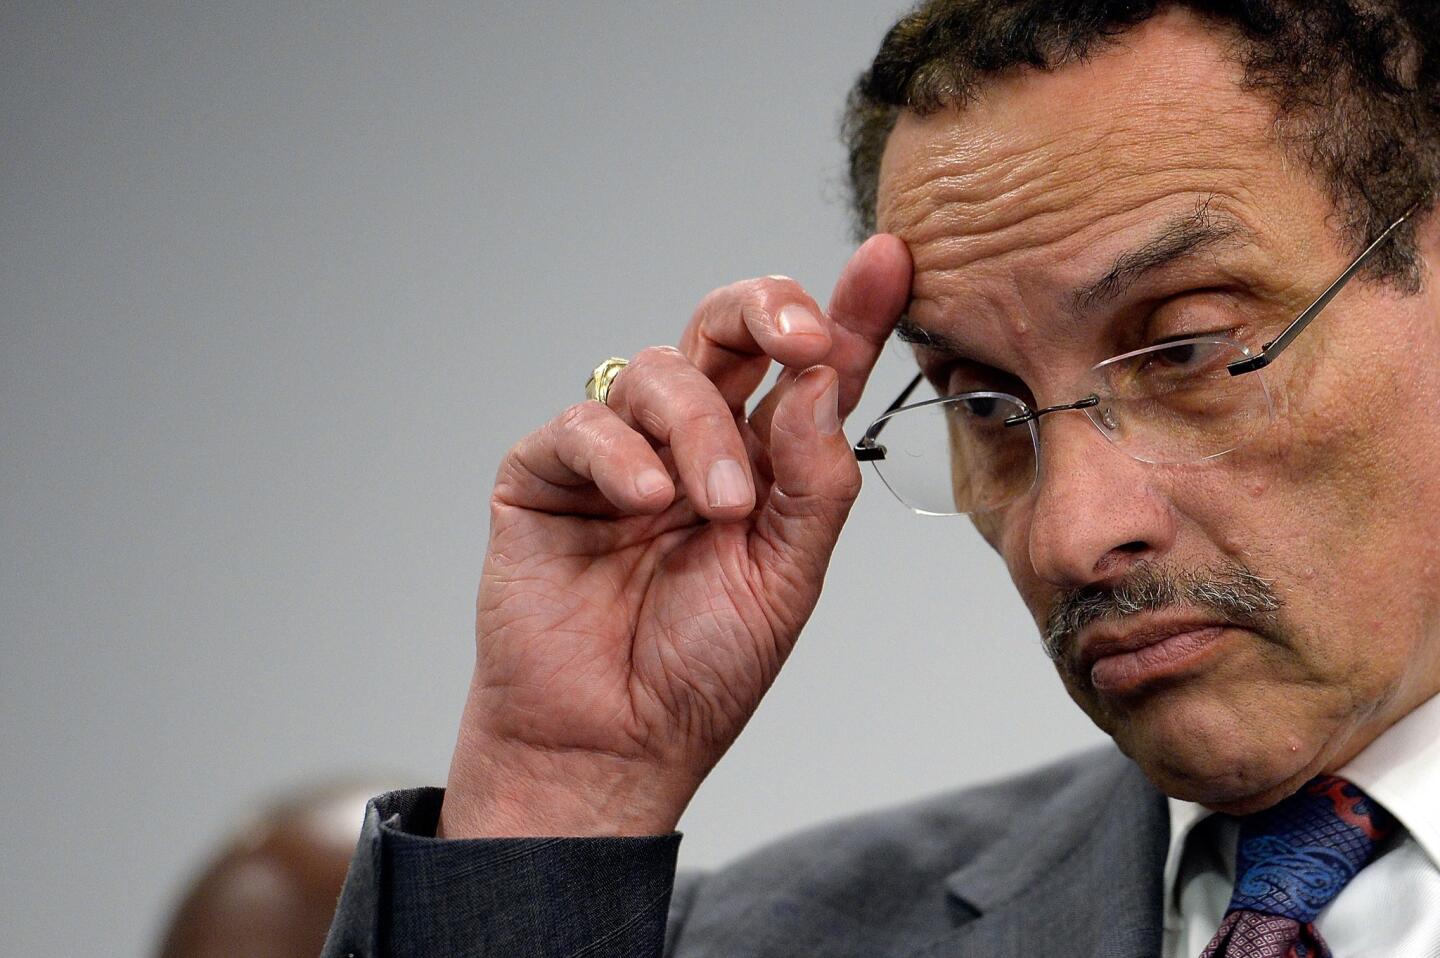 Though Washington, D.C., has refused to cut services to the degree seen in previous shutdowns, Mayor Vincent Gray issued a letter Tuesday warning that "time is running out -- and, soon, I will have exhausted every resource available to me to protect our residents, our workers, and our visitors."